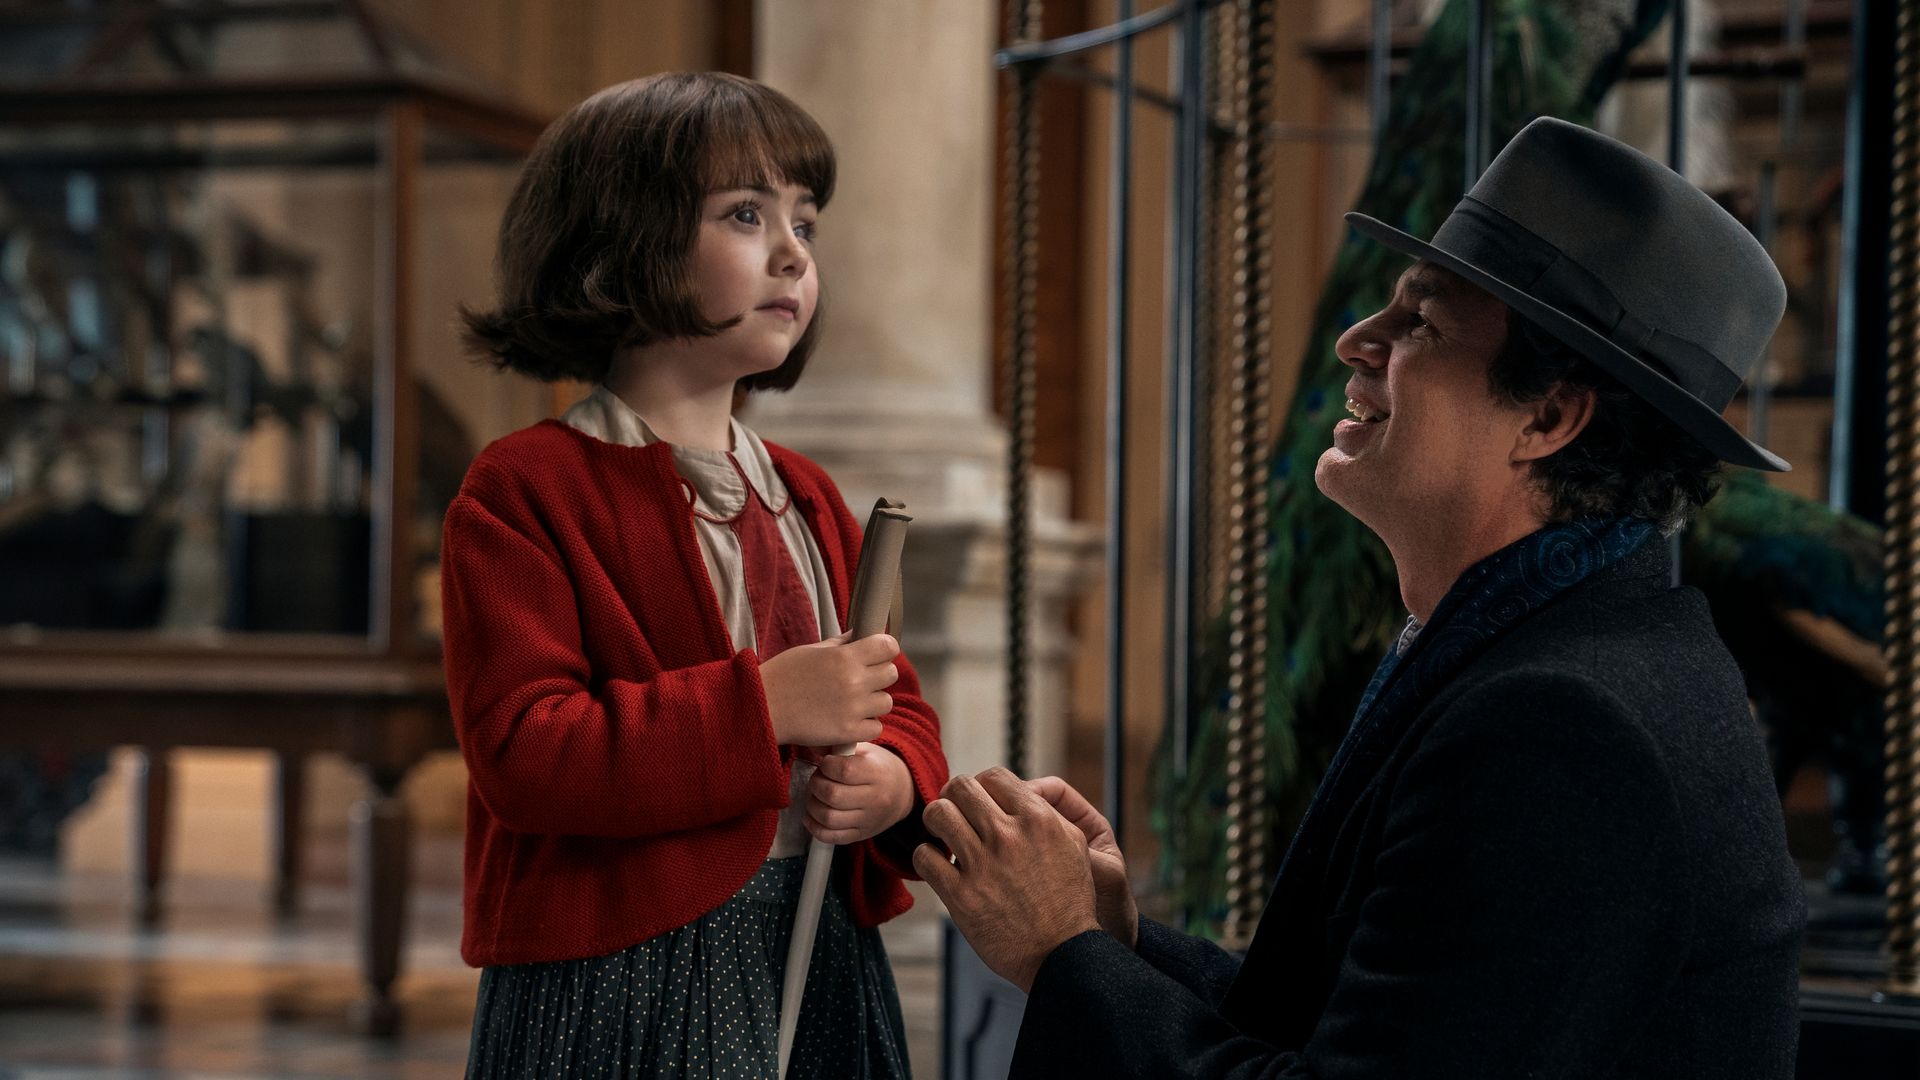 Nell Sutton as Young Marie-Laure and Mark Ruffalo as Daniel LeBlanc